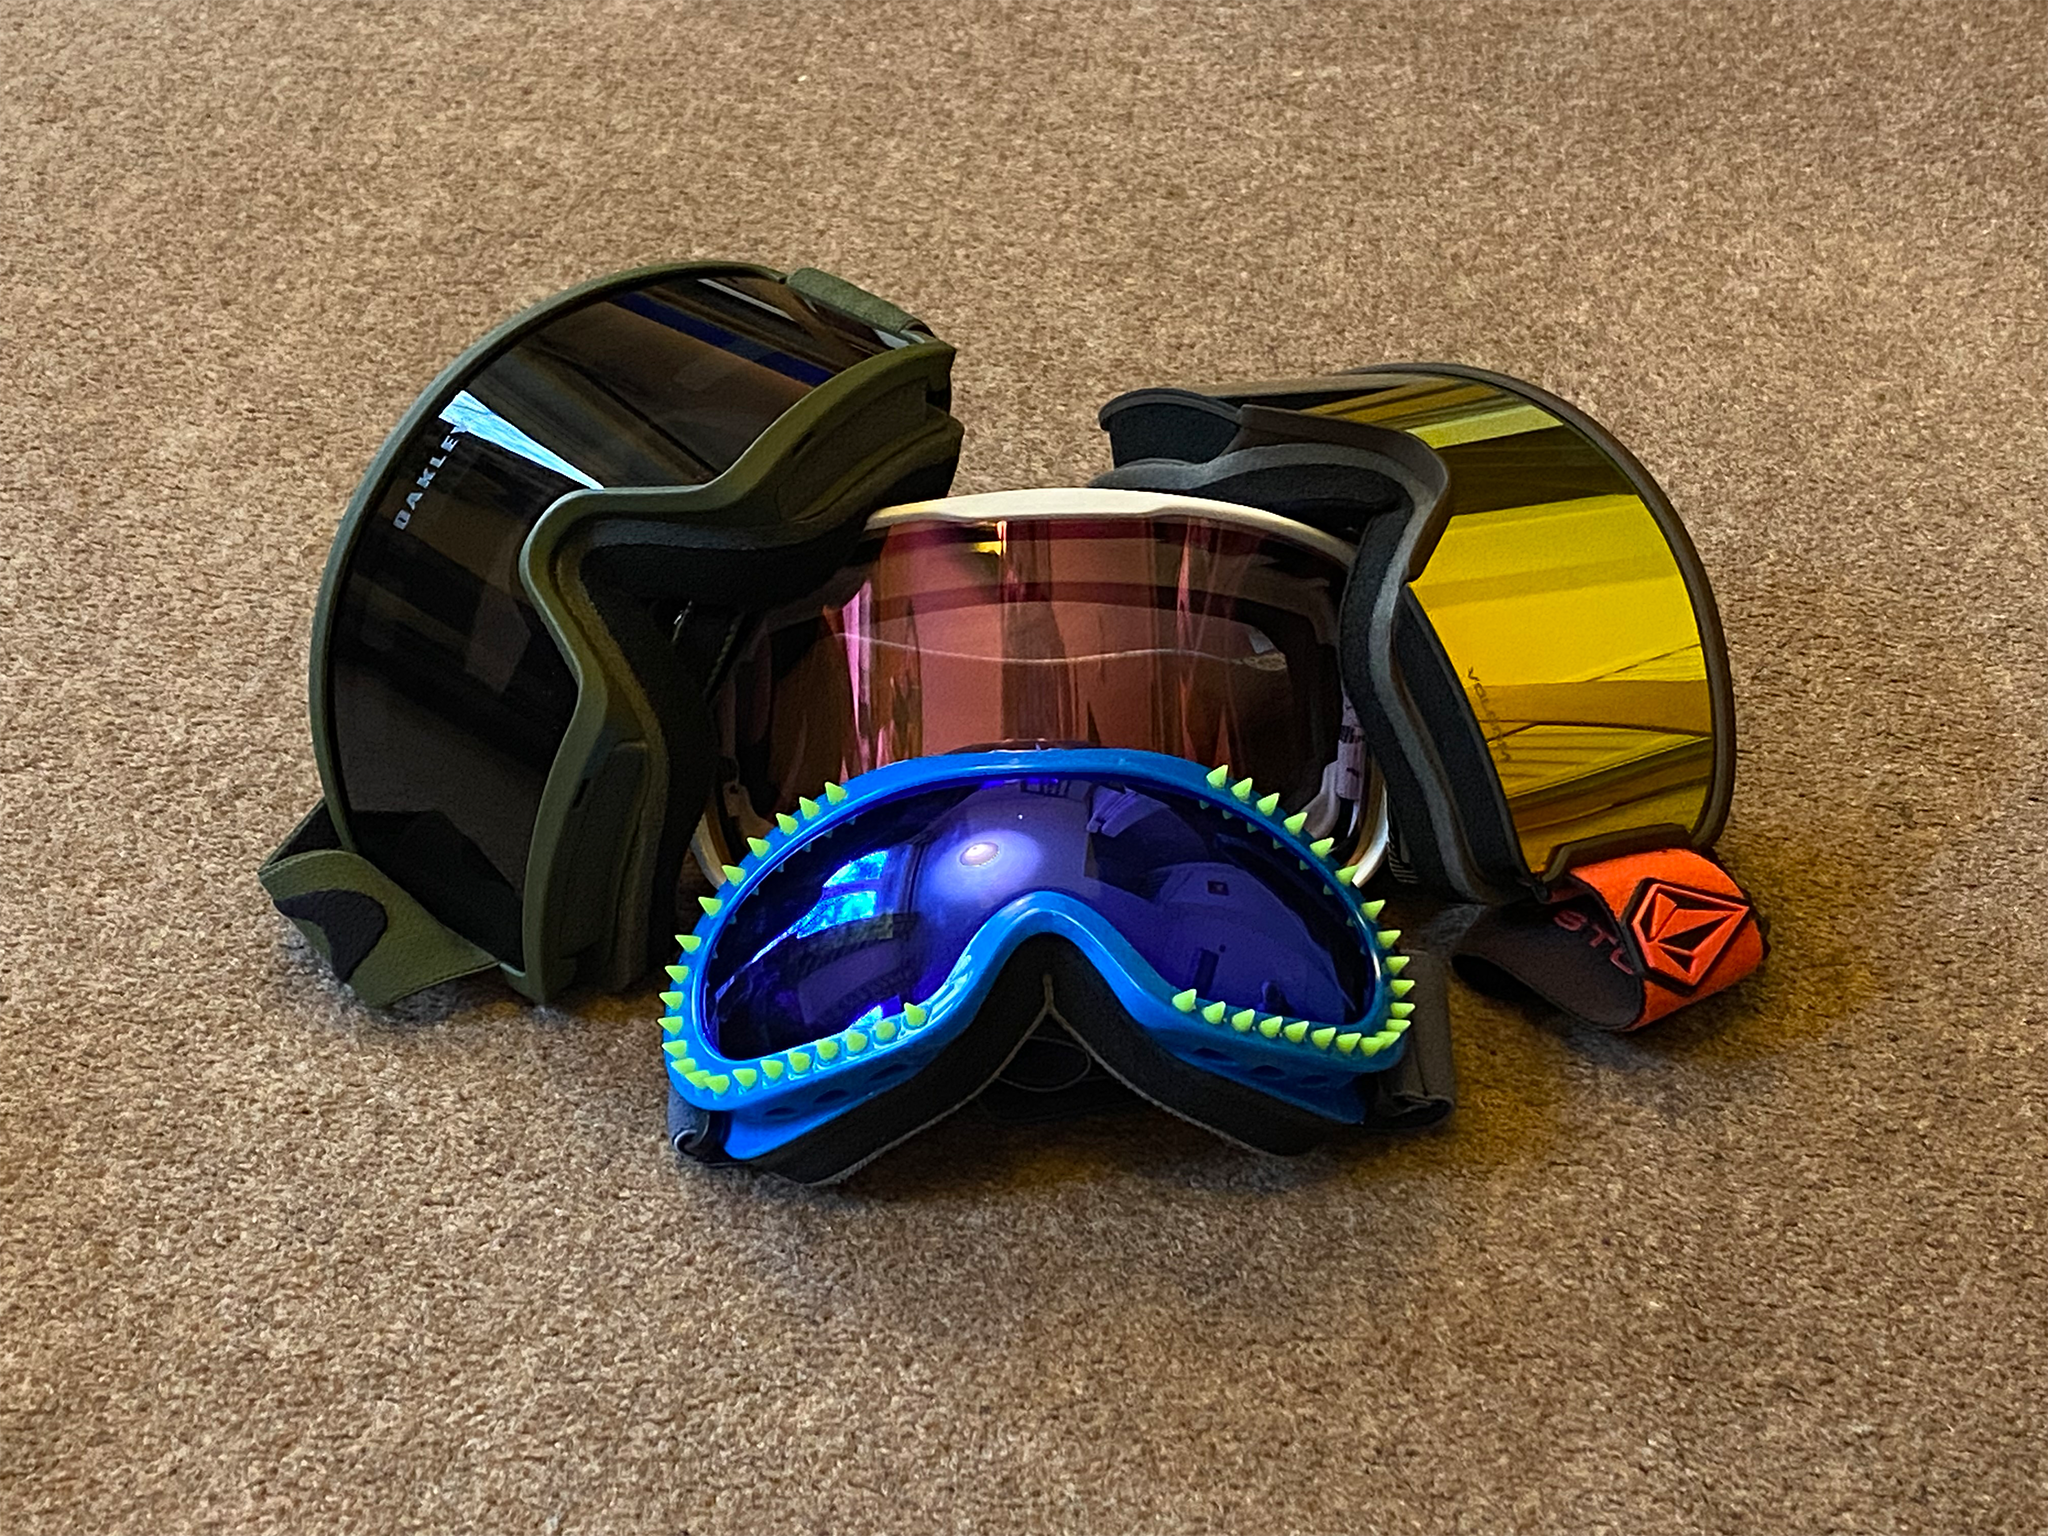 A selection of some of the best ski goggles that we tested